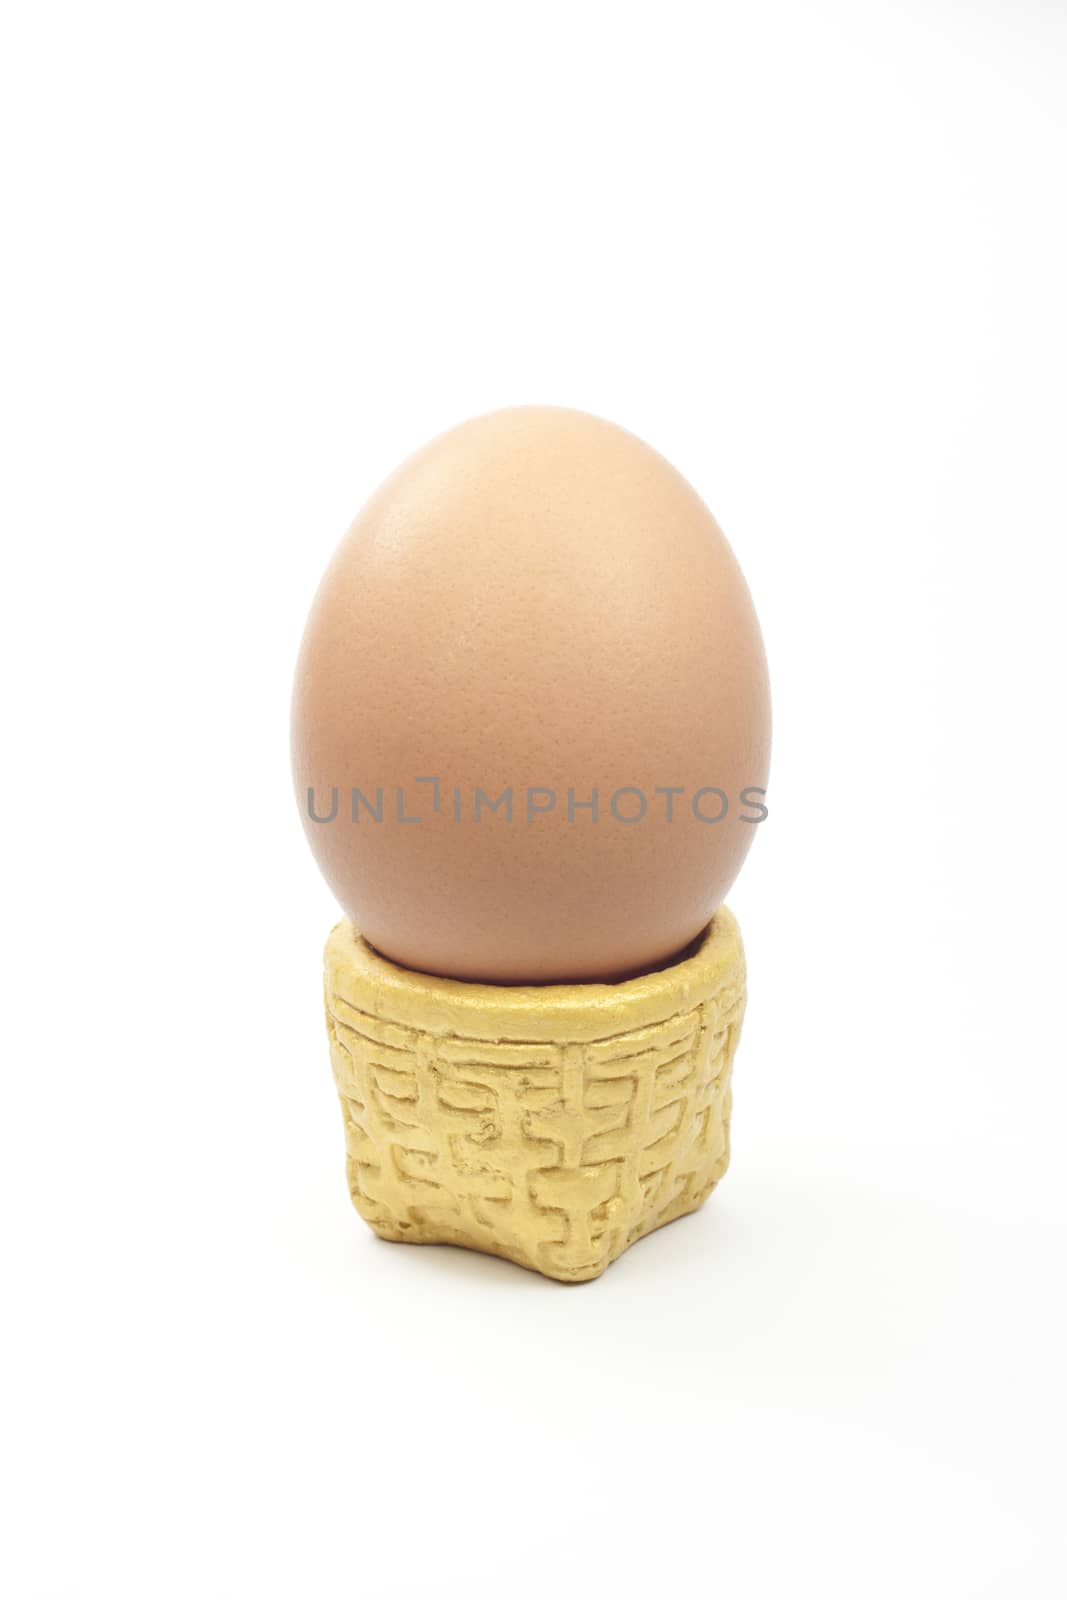 egg is popular food in the world